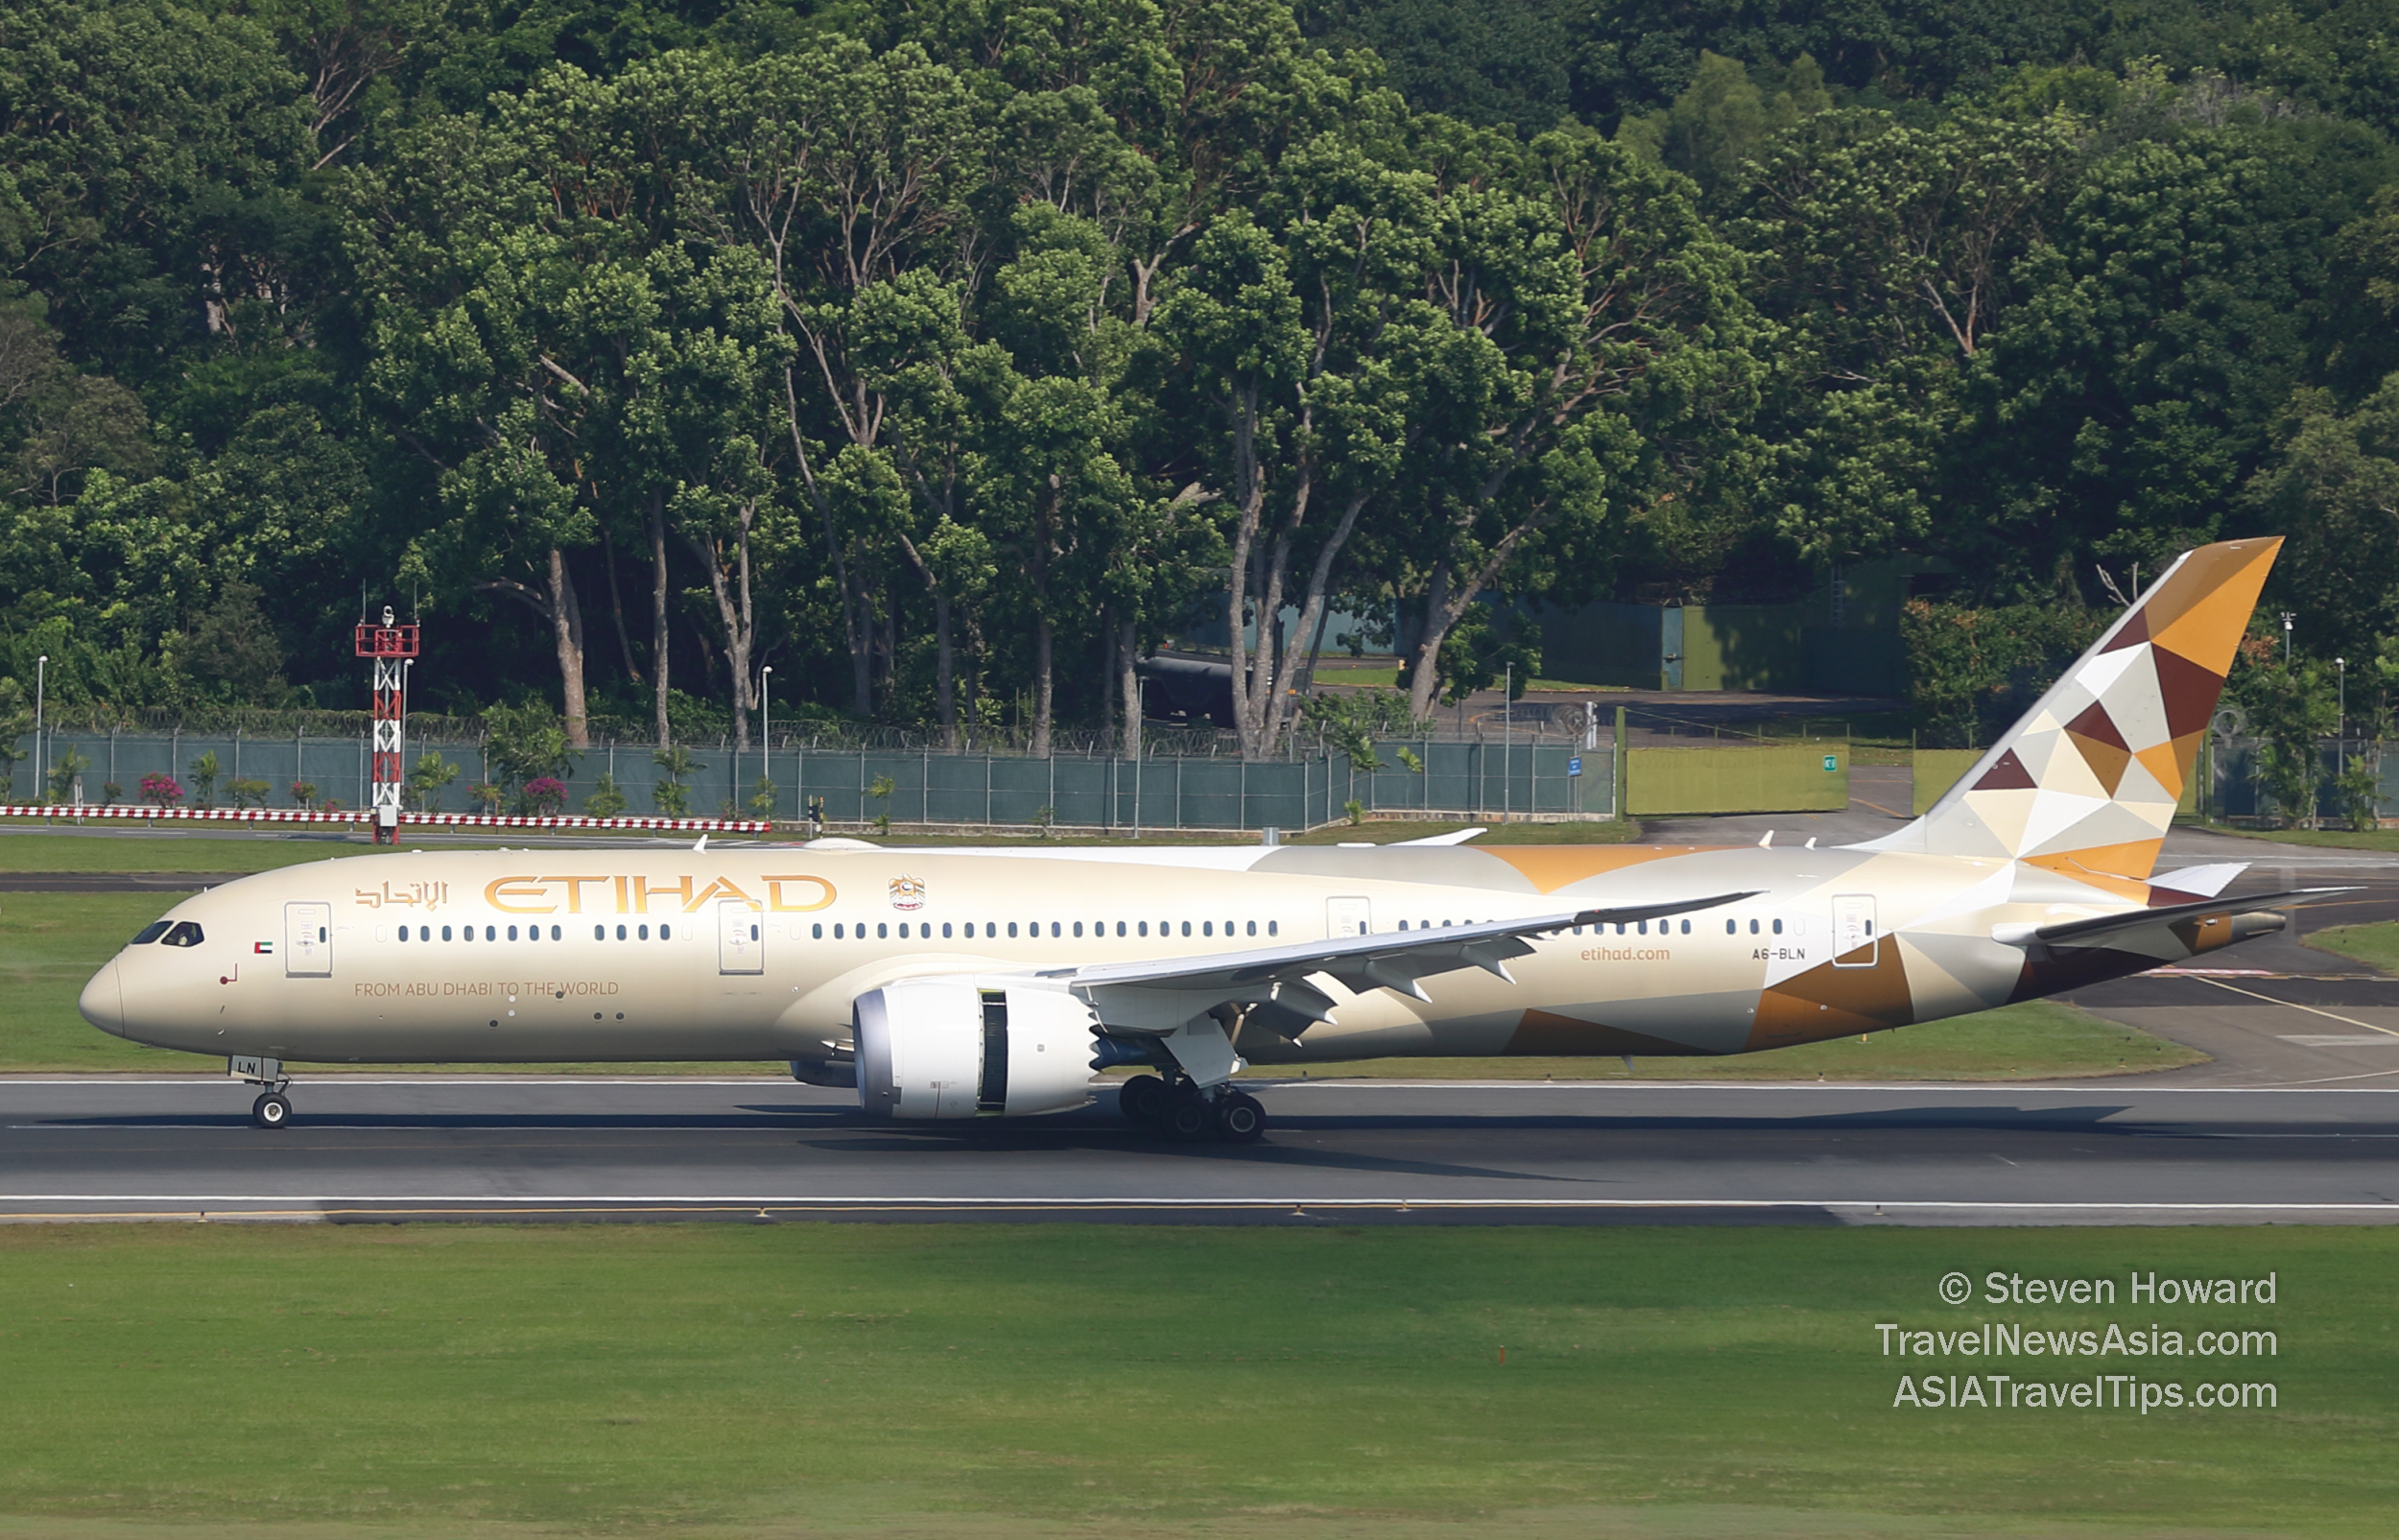 Etihad Airways Boeing 787-9 Dreamliner reg: A6-BLN. Picture taken by Steven Howard of TravelNewsAsia.com Etihad isn't using the Dreamliner on its flights to Barcelona, the airline is instead using an Airbus A330-200 in a two-class configuration. Click to enlarge.